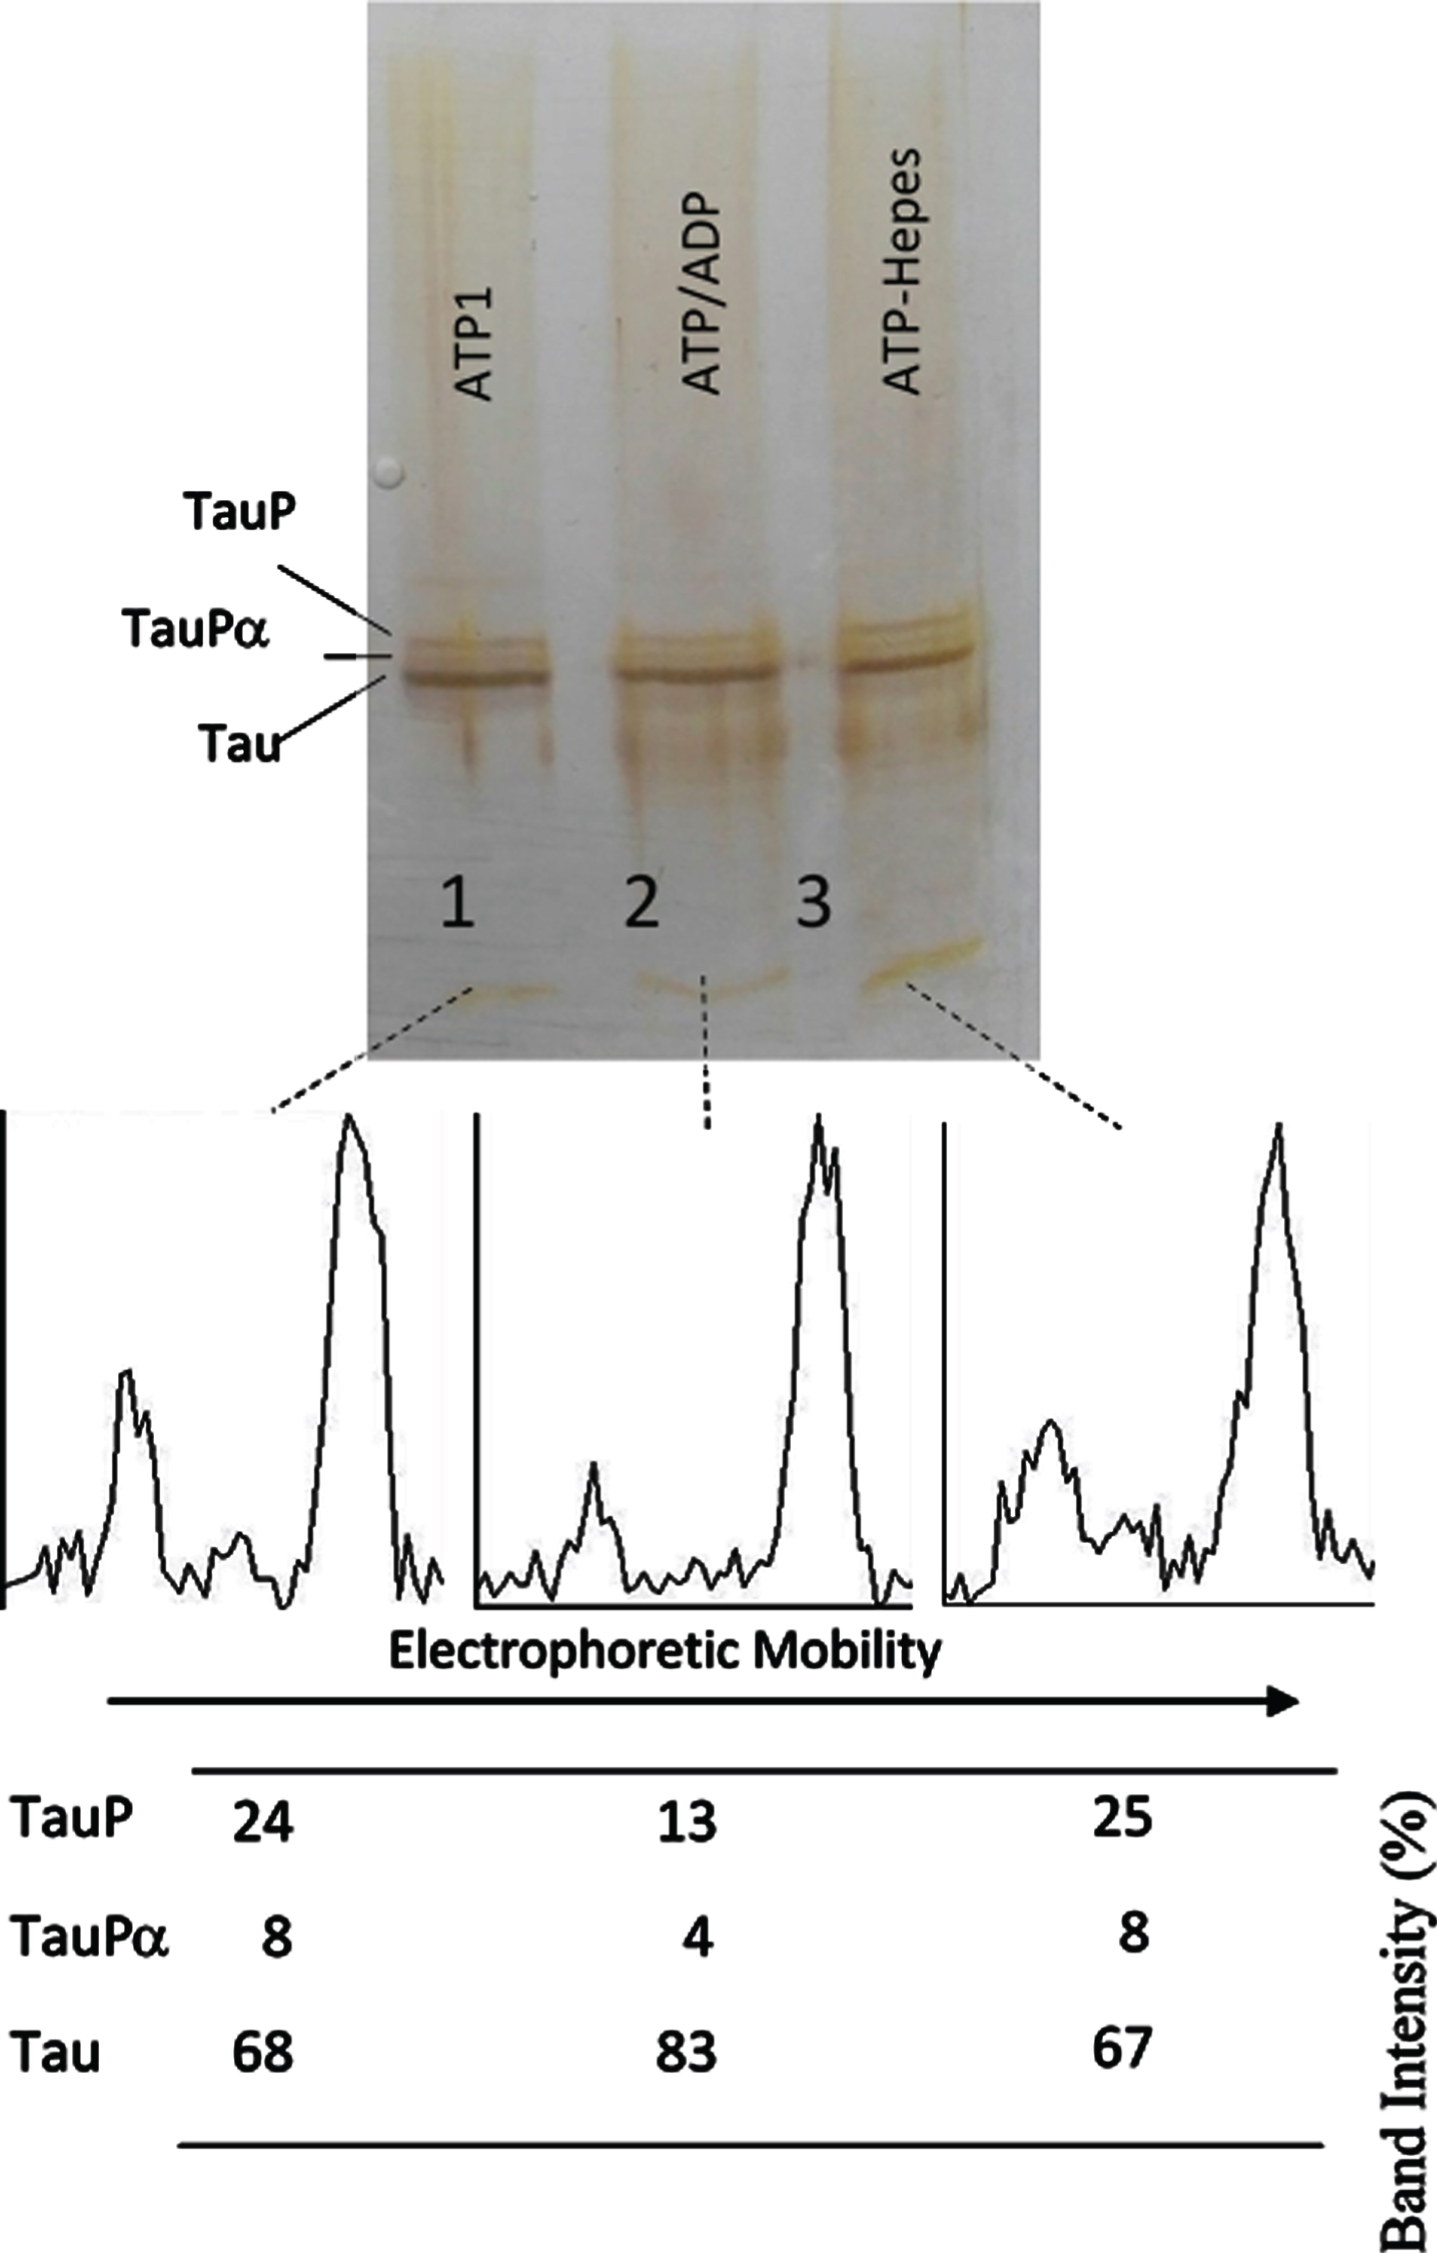 Successive incubation of tau protein with ATP and ADP. The mixture of tau protein and C-PKA prepared as described in Materials and Method (Tau-C-PKA) was diluted 1/10 in a buffer composed of 75 μl of Hepes buffer containing 10 mM Hepes and 0.1 M NaCl, at pH 7 and 50 μl of phosphate buffer containing 250 mM phosphate and 0.1 mg/ml Ampicillin at pH 7. This reaction mixture contained 15 mM MgCl2, 0.25 mM EGTA, 50 mM P1, P5-Di(adenosine- 5’)pentaphosphate, 0.25 mM 2-mercaptoethanol, 0.05 mg/ml DNA, and ATP 0.1 mM. After 2 h of incubation at 30°C, in the presence of ATPMg2+, the reaction mixture was divided in three parts: the first one (25 μl) (ATP1) was loaded in the gel (lane 1); the second one (22.5 μl) was incubated at 30°C for 30 min after adding 2.5 ml of 10 mM ADP (ATP/ADP) (lane 2); the third one (22.5 μl) was incubated for the same time, at 30°C, after adding 2.5 μl of Hepes buffer containing 10 mM Hepes, 0.1 M NaCl, 0.1 mg/ml DNA, and 100 μM P1, P5-Di(adenosine- 5’)pentaphosphate at pH 7 (lane 3). The Table at the bottom of the figure shows the results of peak percentages after the scanning of the bands. TauP represent the band displaying the lowest mobility, and TauPα represents the intermediate band usually observed at short times of incubation. The rolling ball radius used for subtraction of background was of 5 pixels.